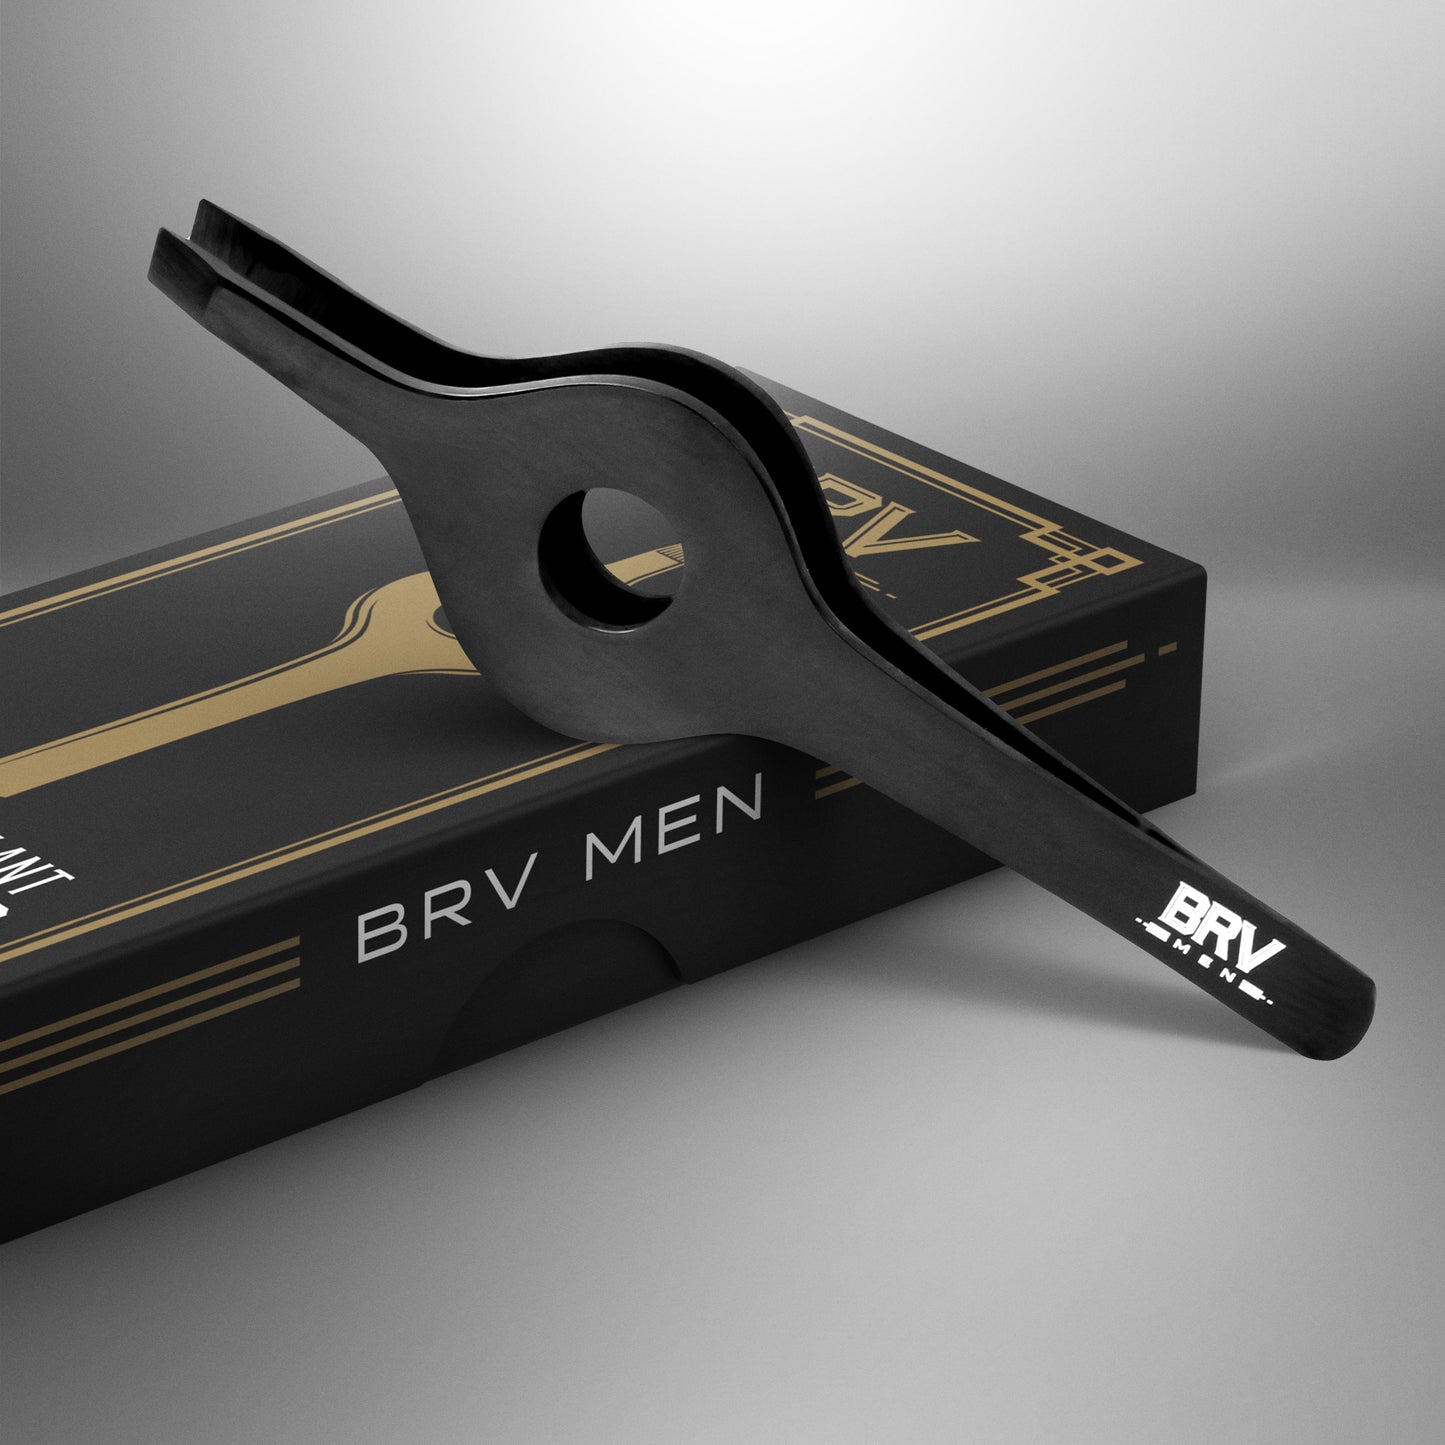 
                  
                    BRV MEN Wide Grip Slant Tweezers - Titanium Coated Stainless Steel - Perfectly Aligned Slanted Tips for Ultra Precision - Professional Tweezers for Eyebrows and Nose/Ear/Facial Hair - (Black)
                  
                